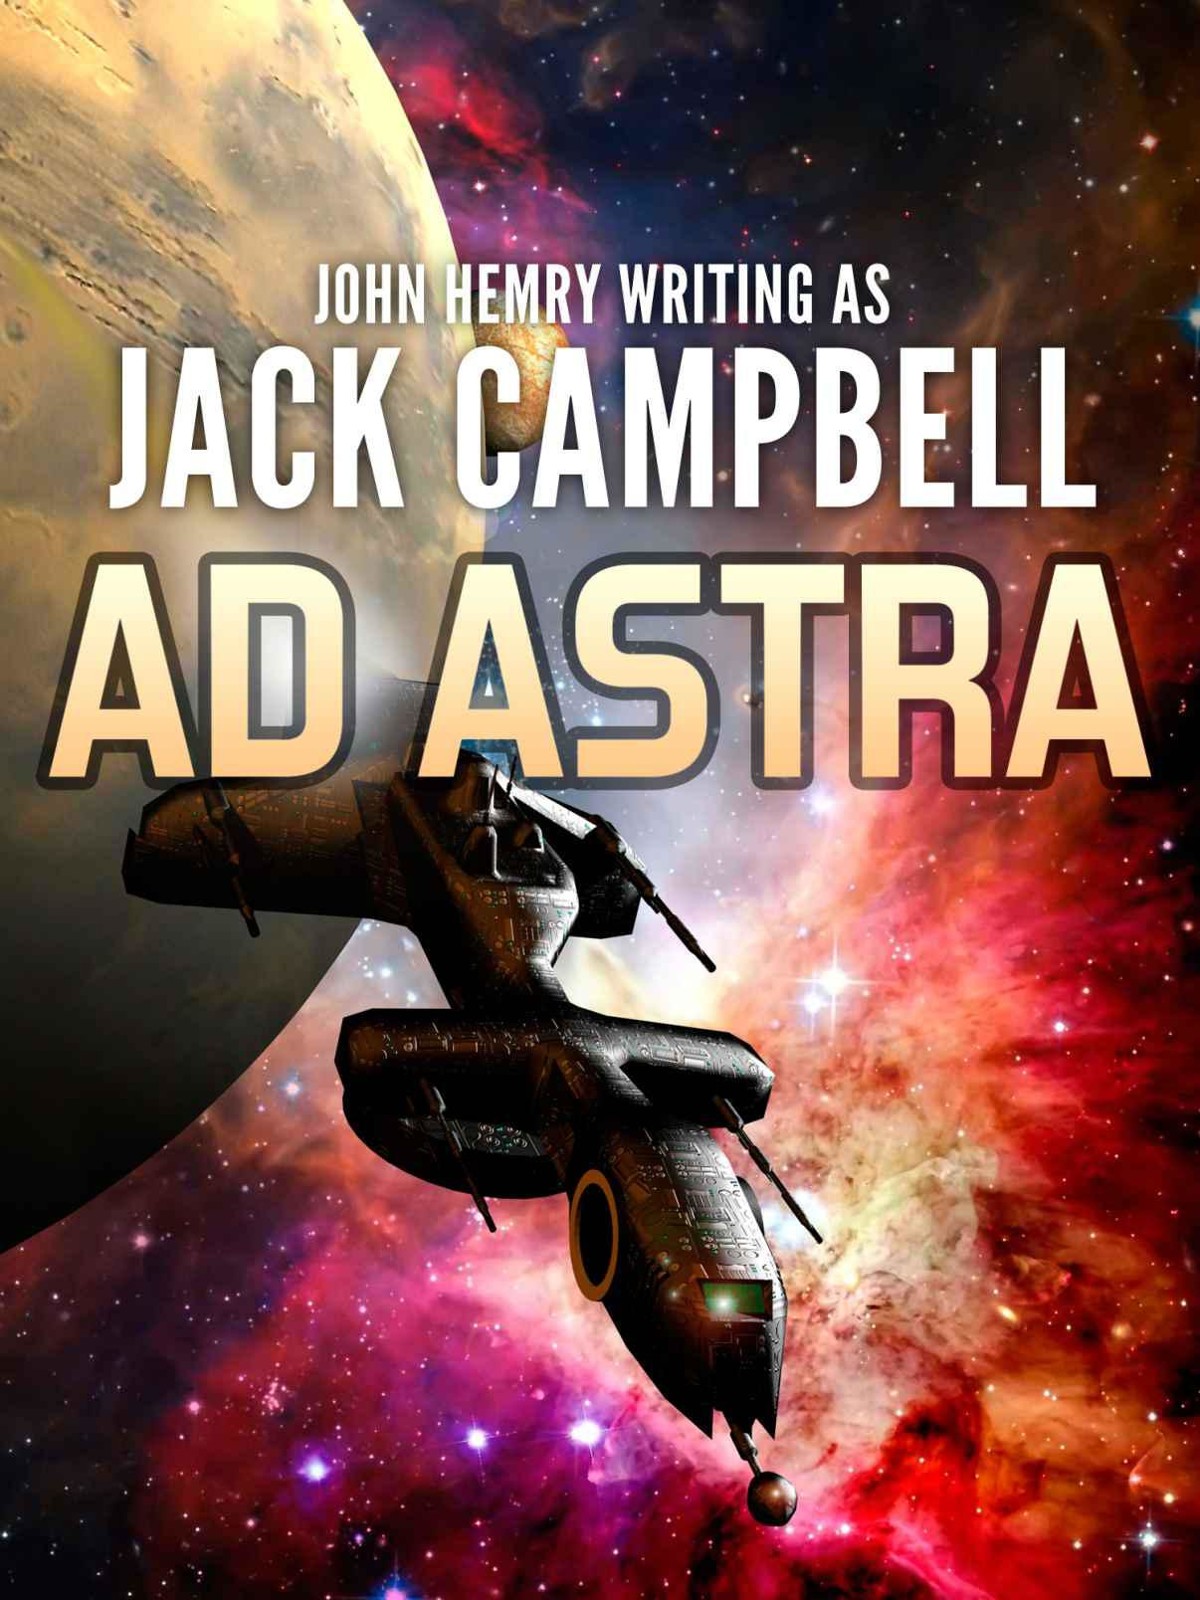 Ad Astra by Jack Campbell